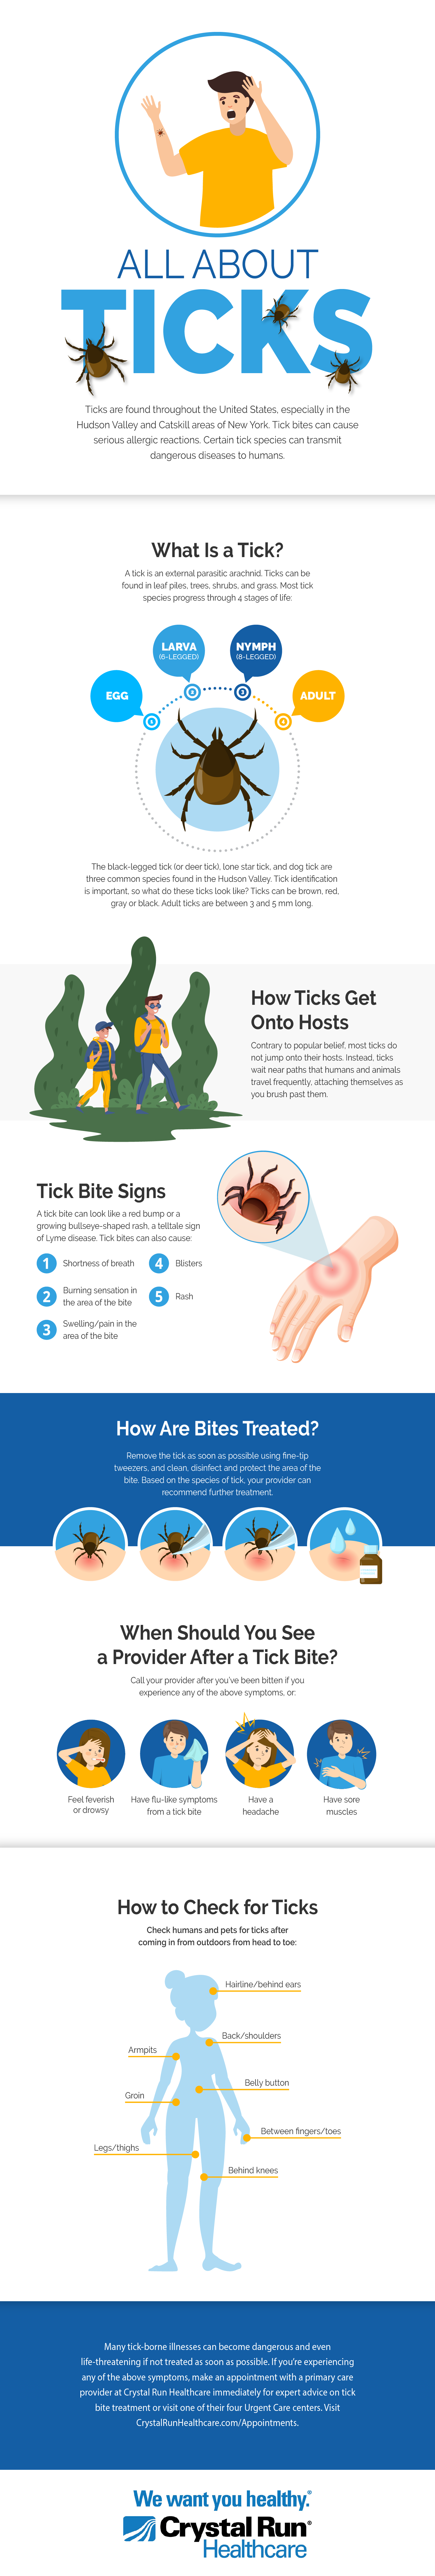 All About Ticks Infographic